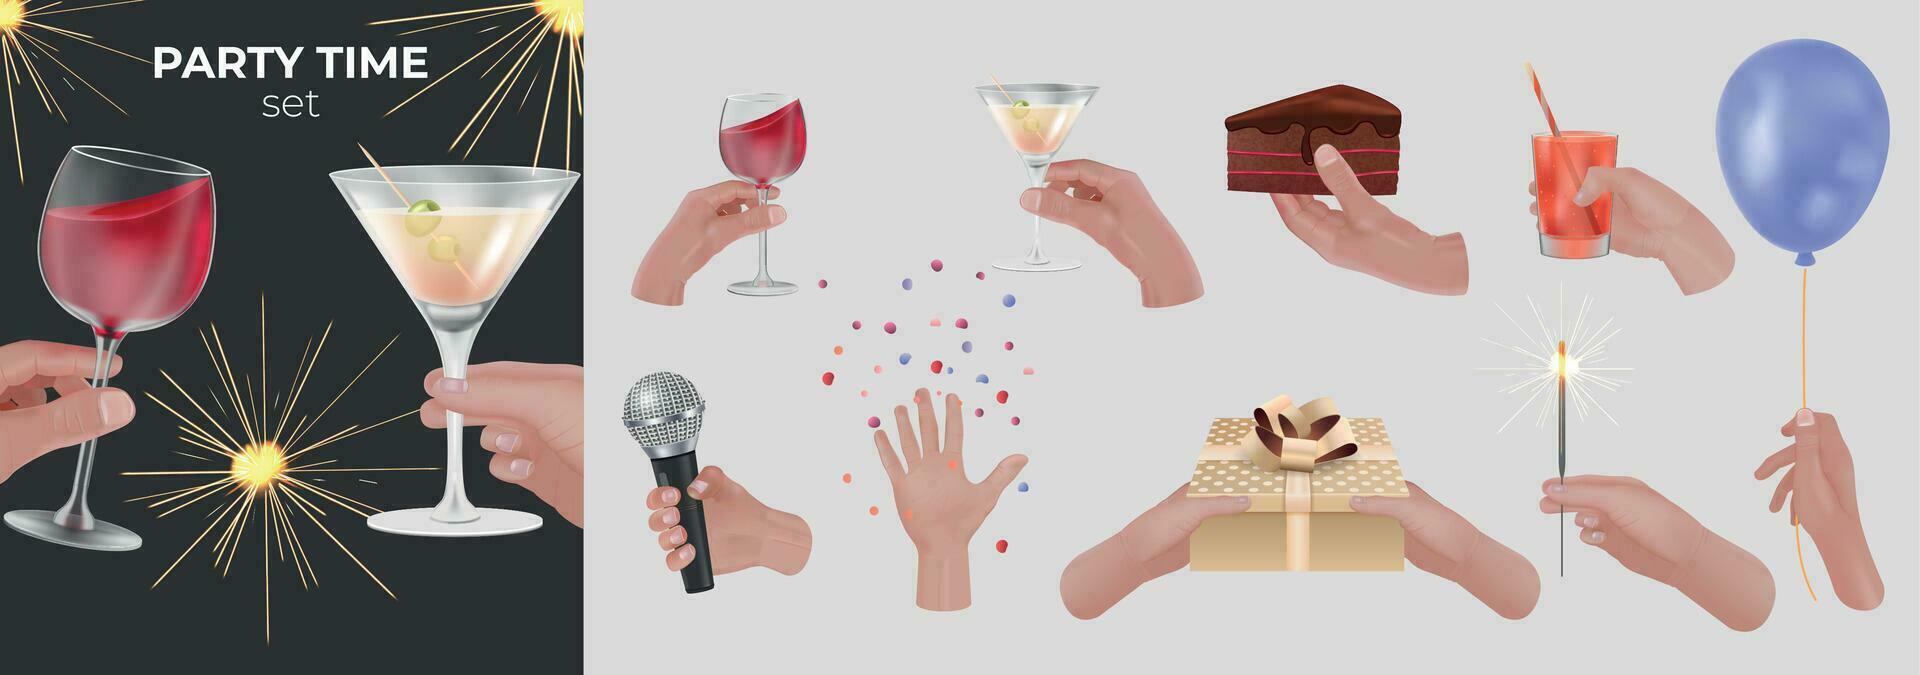 Hands At Party Set vector